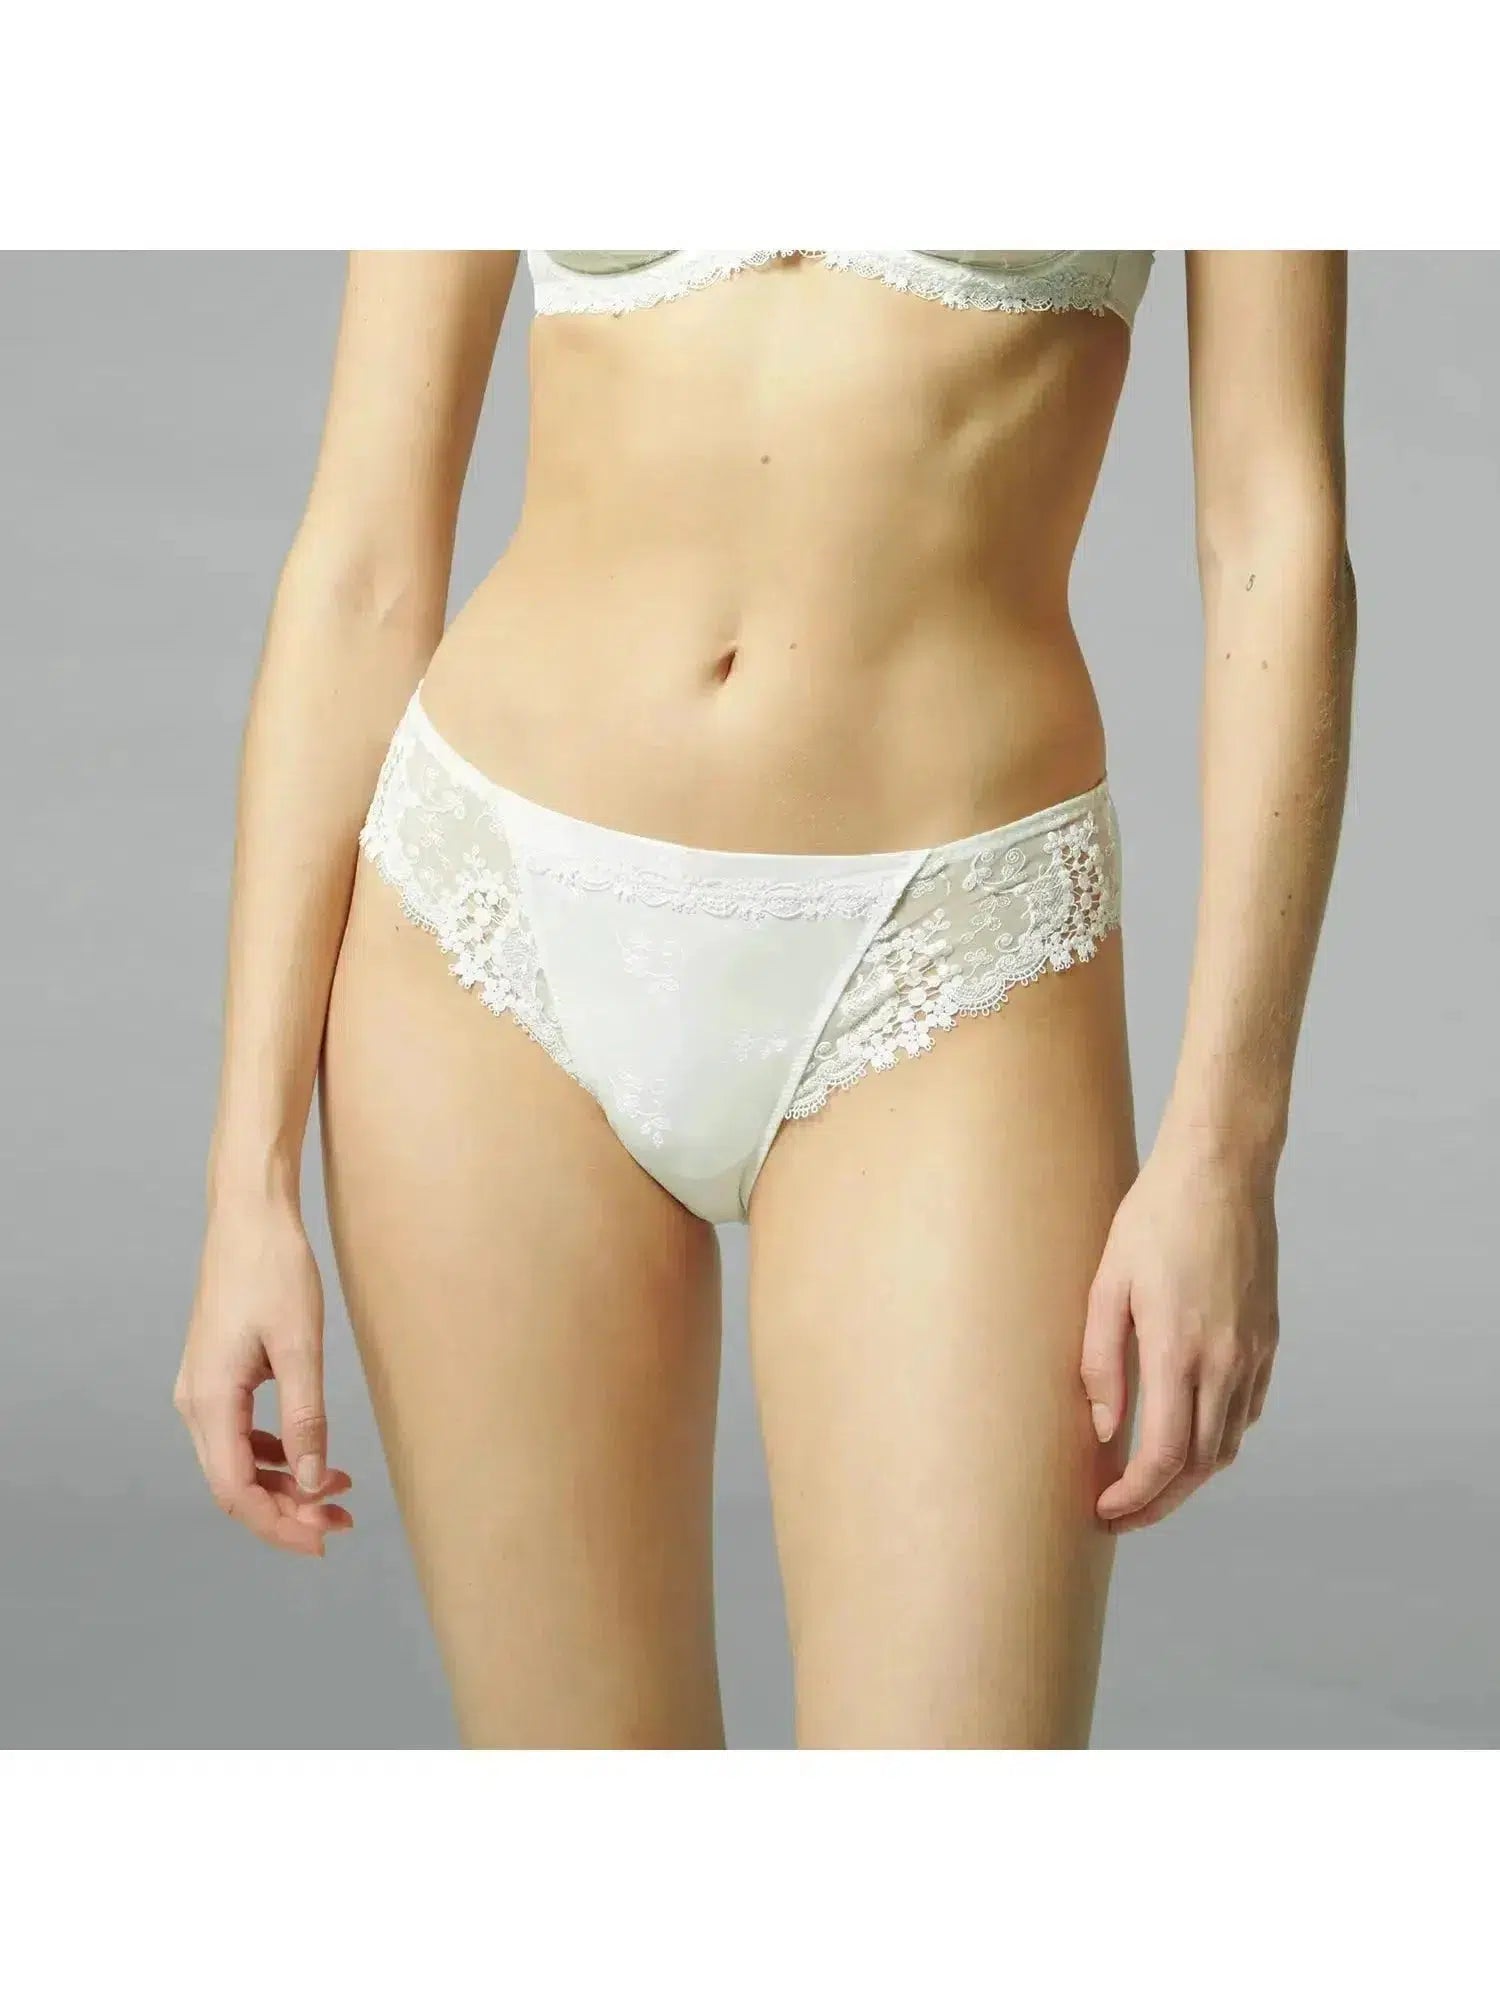 Simone Perele Wish Brief Panty 12B720 in ivory color - front